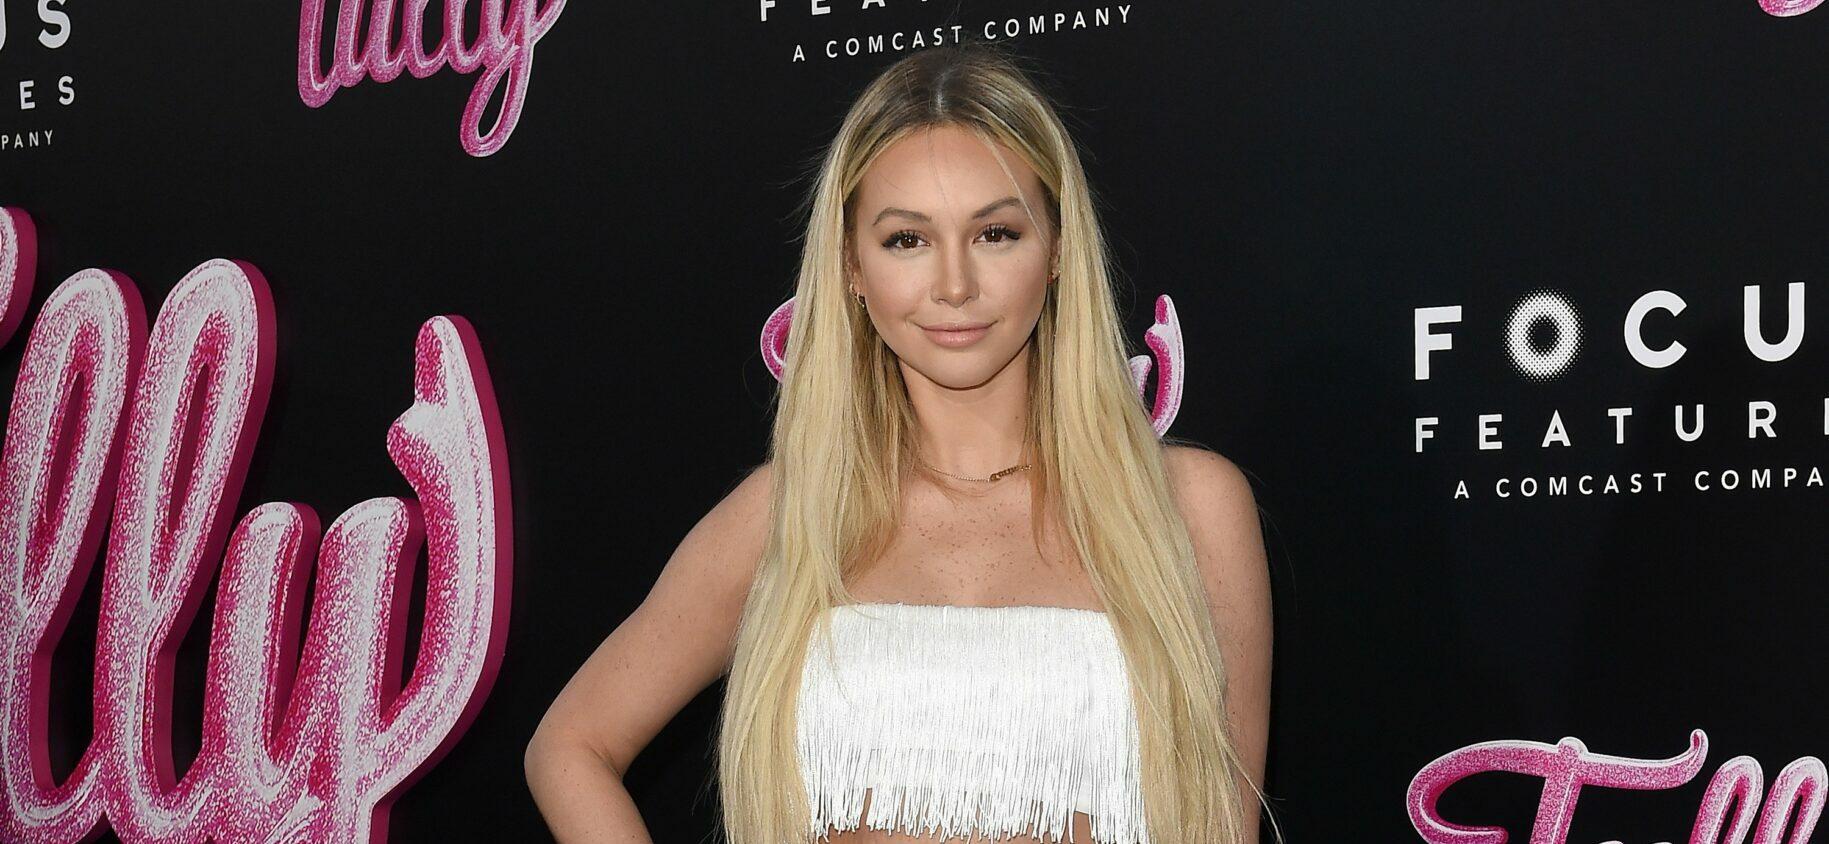 Corinne Olympios Shows Off Legs In Cut-Off Shorts And Cowboy Boots